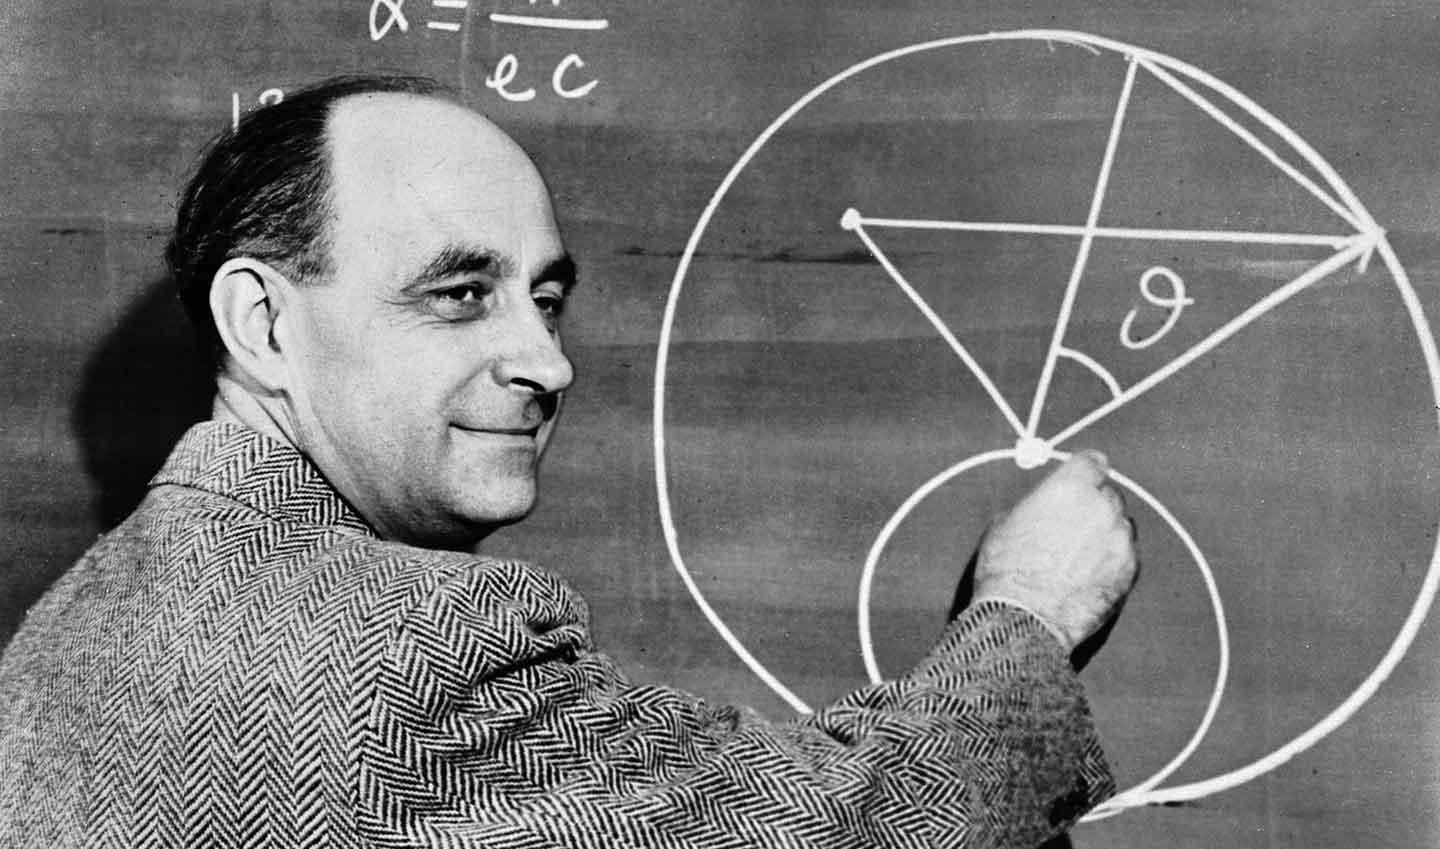 The Fermi Paradox, named for Dr. Enrico Fermi, describes the apparent contradiction between the lack of evidence of extraterrestrial civilizations and the high probability that such alien life exists. AP